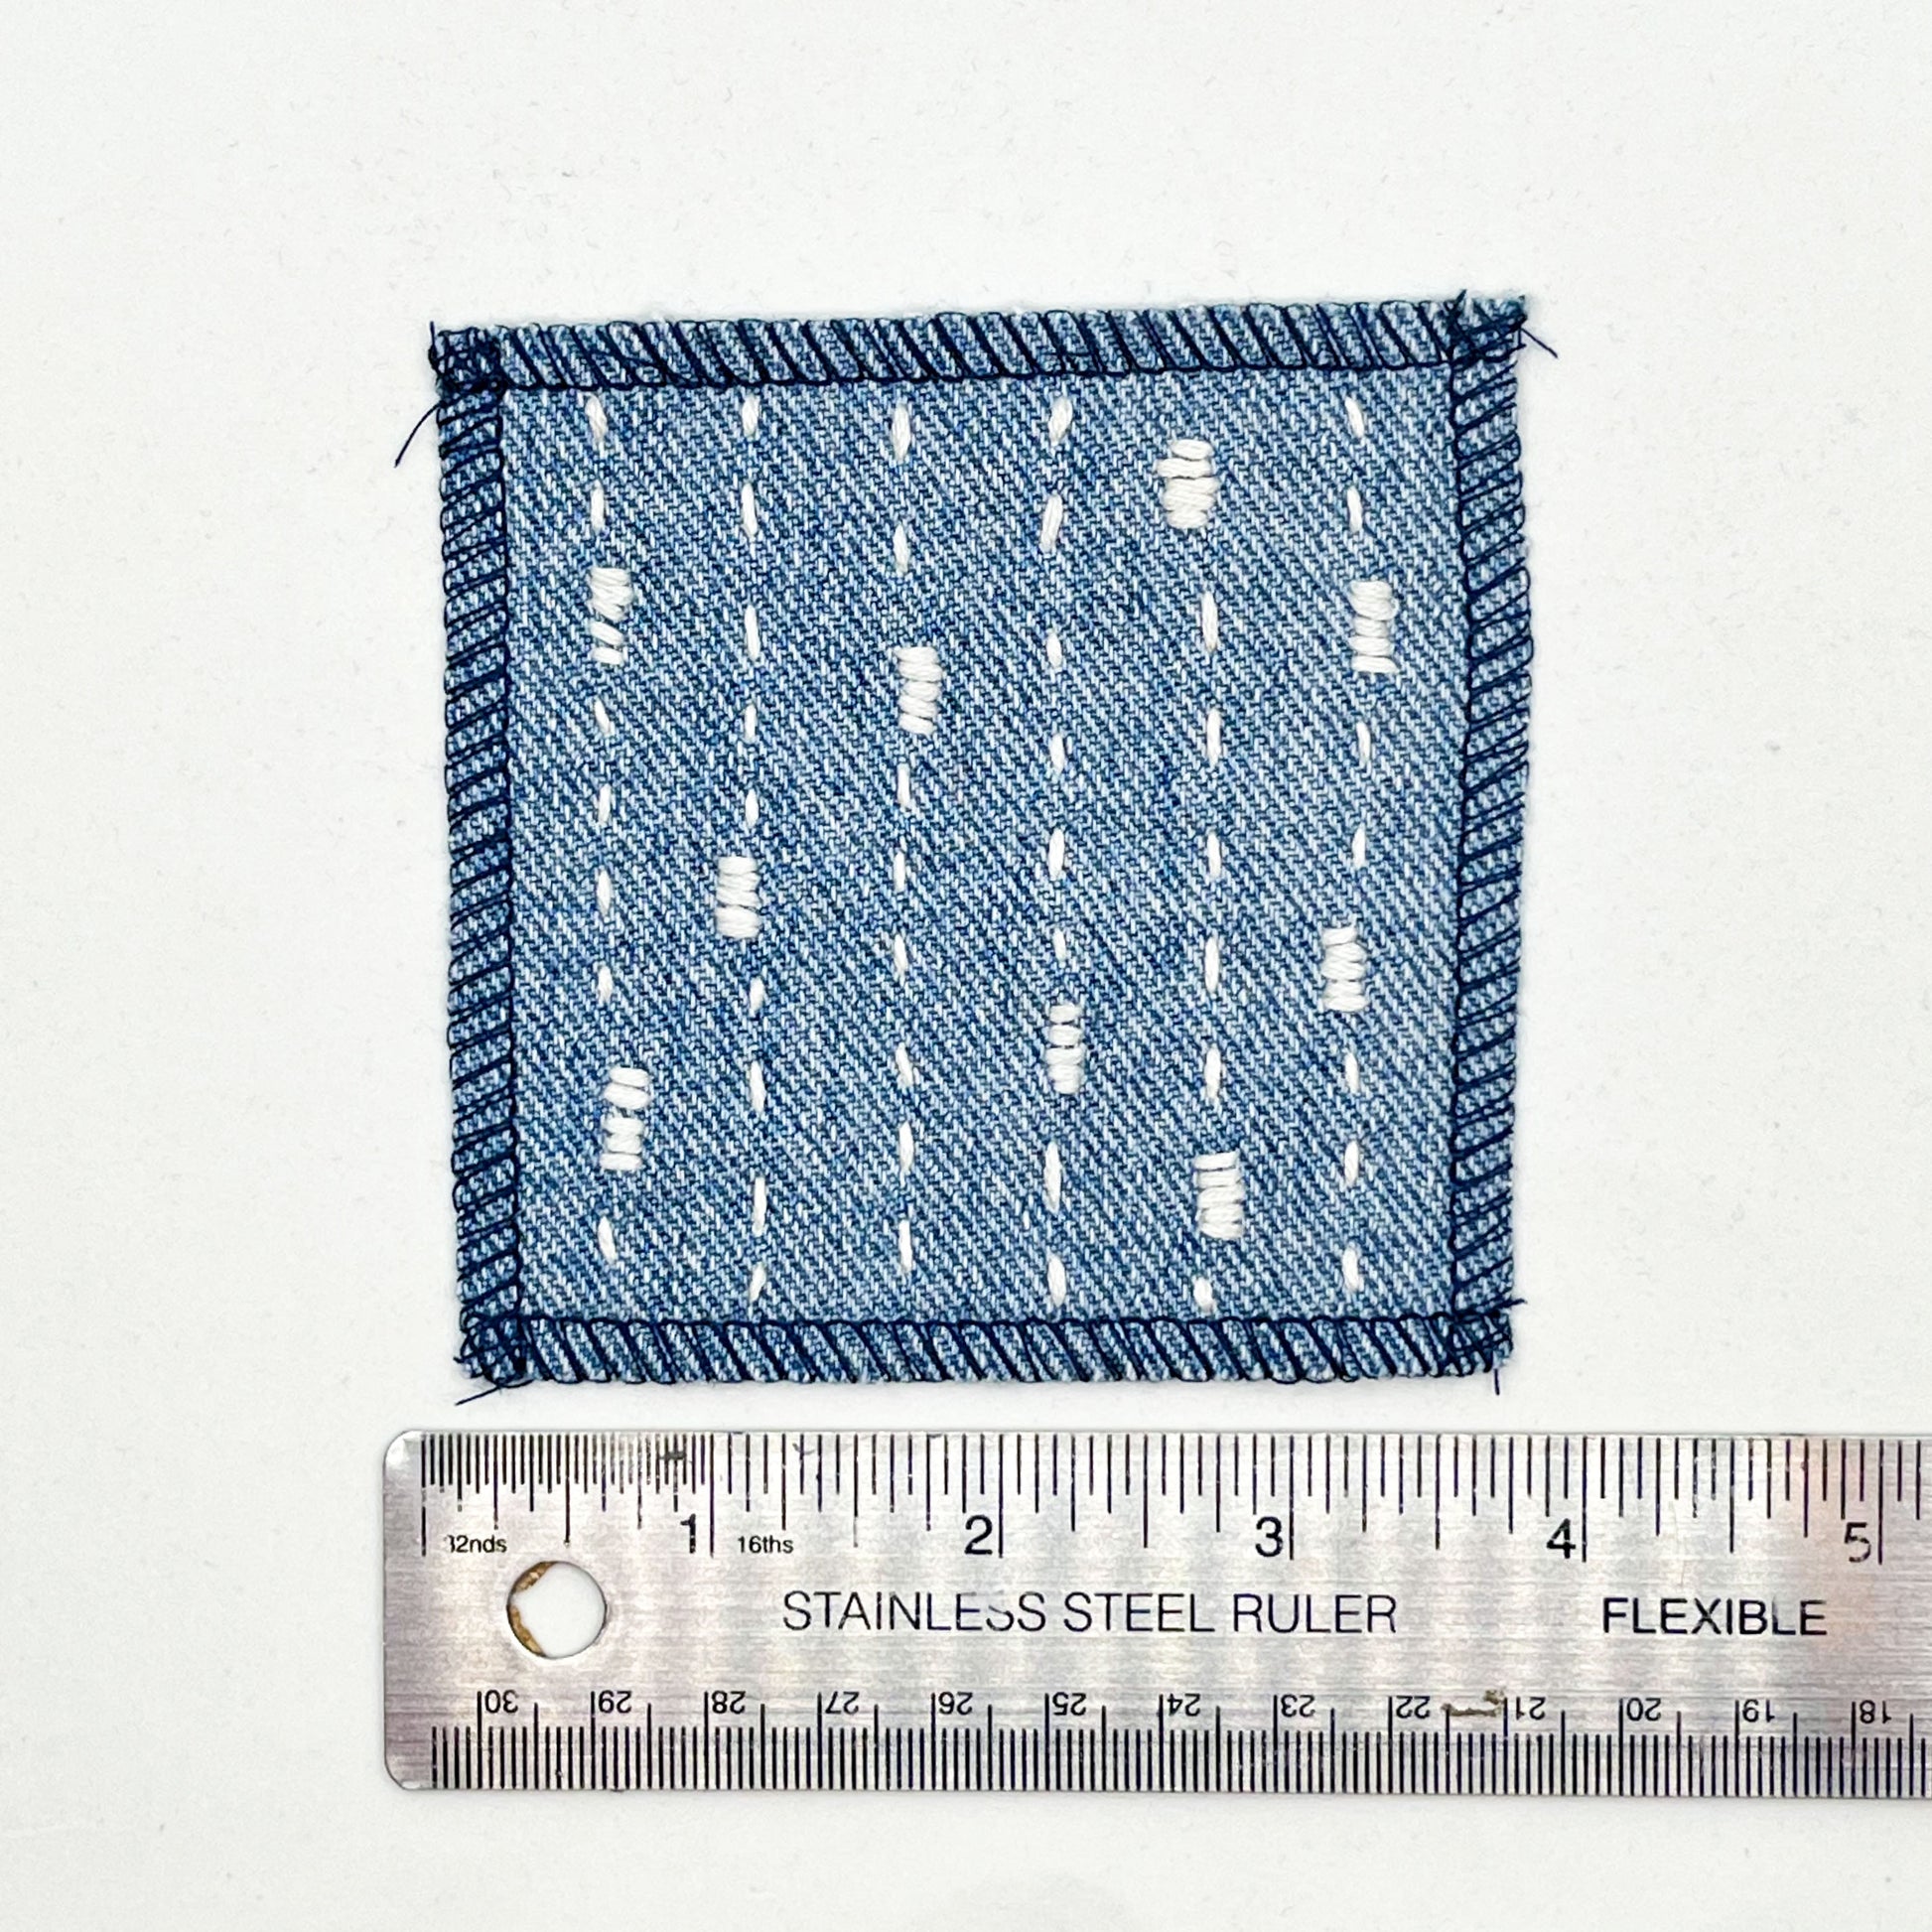 a square patch made out of denim, handstitched with ivory running stitches with randomly placed small rectangles made of stitches running the other direction, with overlocked edges, on a white background, placed next to a metal ruler to show a width of four inches